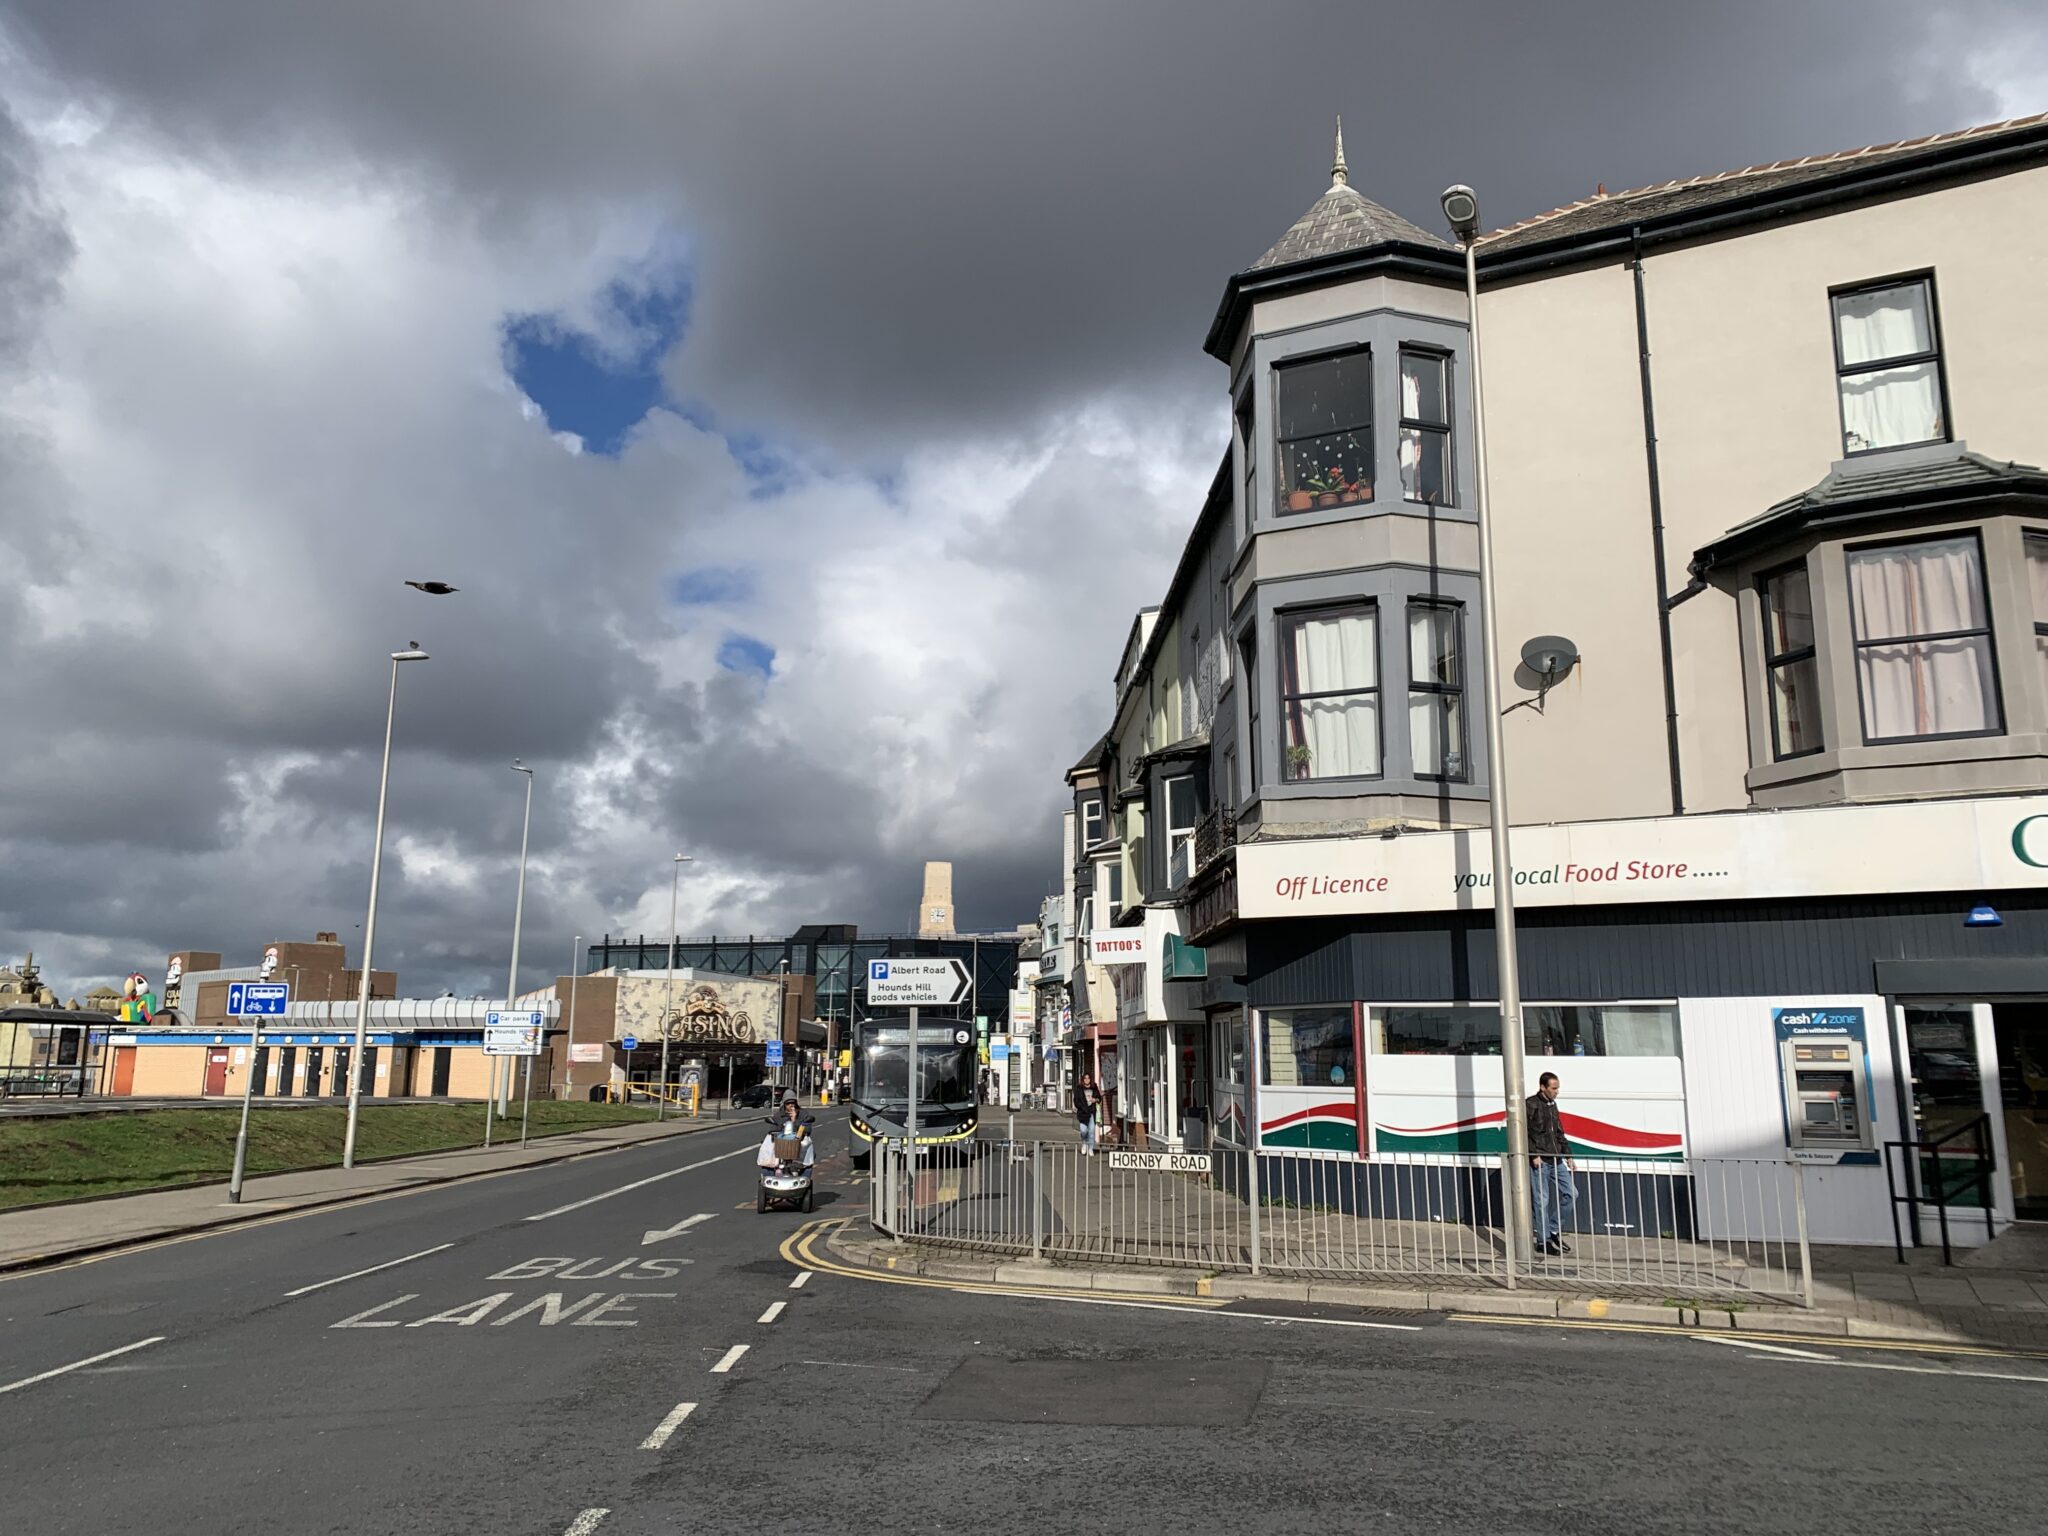 Hotels in Blackpool - Hornby Road